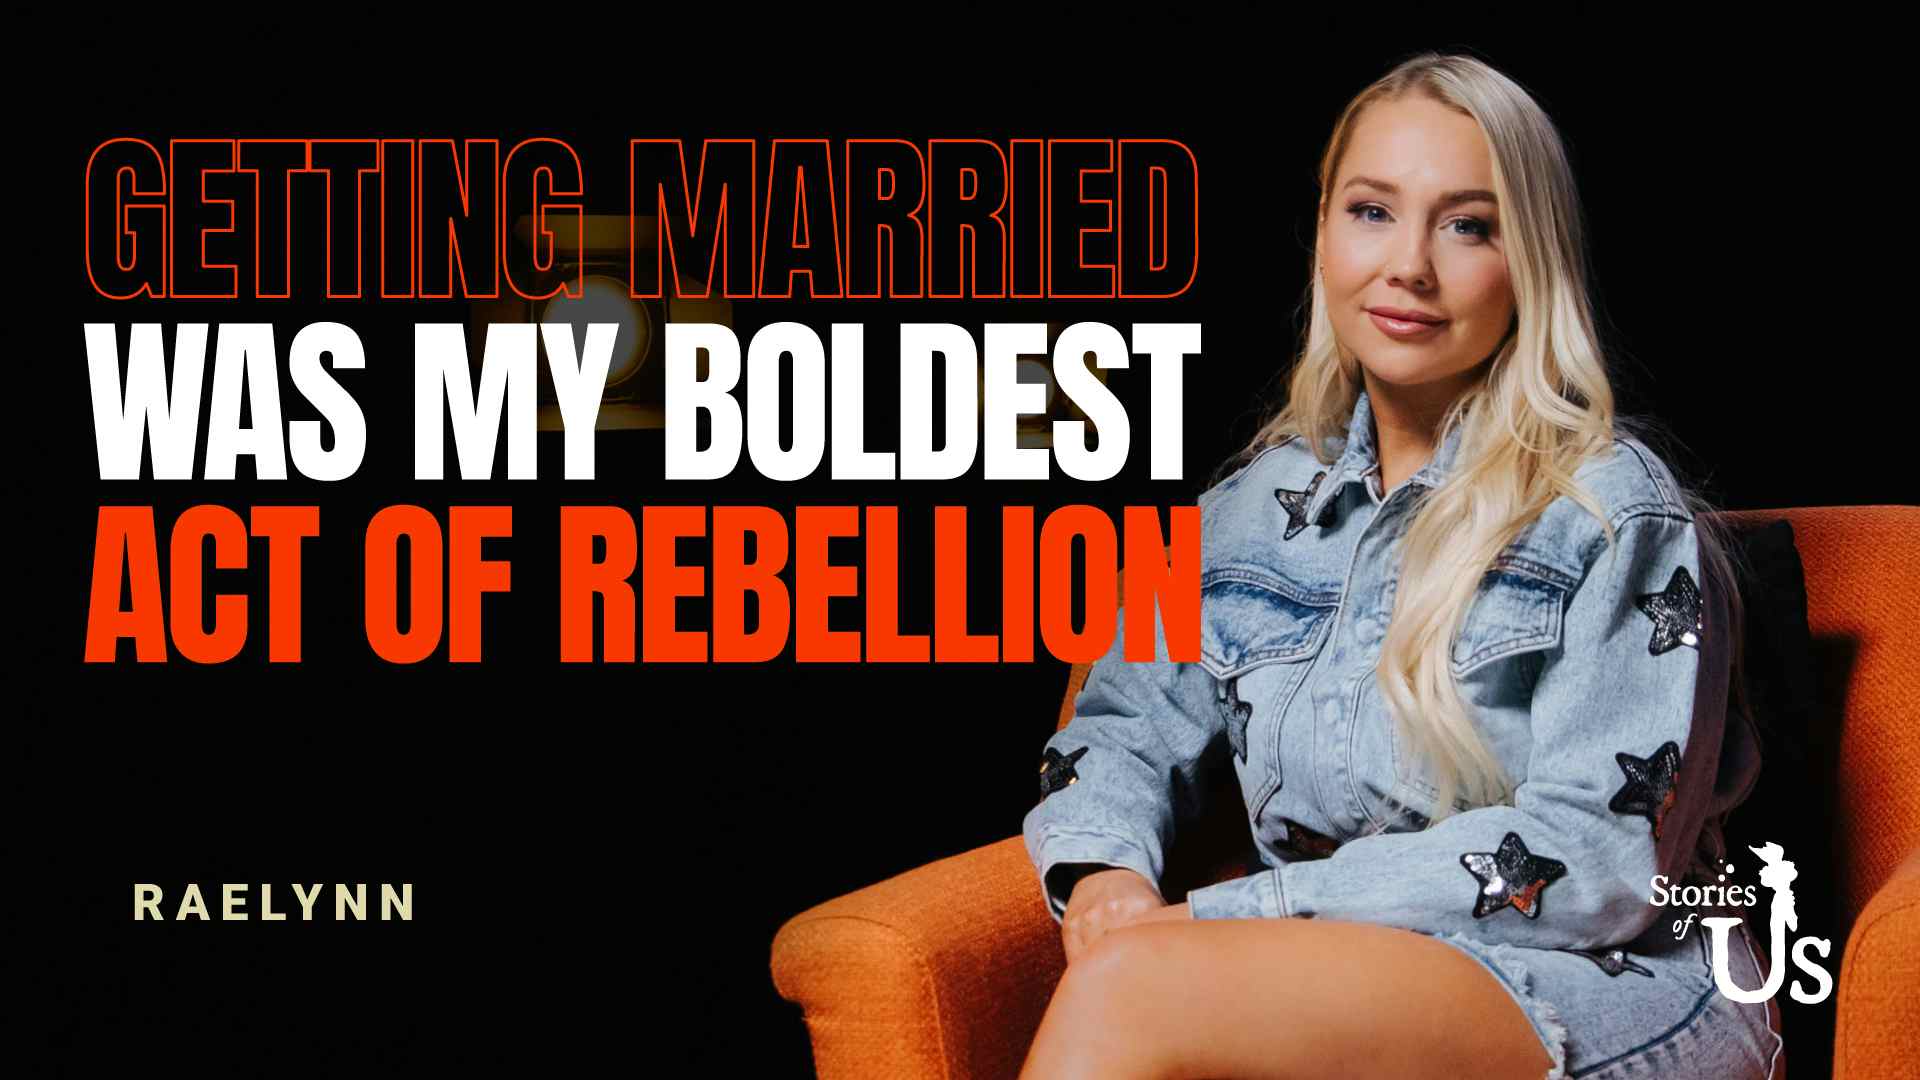 RaeLynn: Getting Married Was My Boldest Act of Rebellion